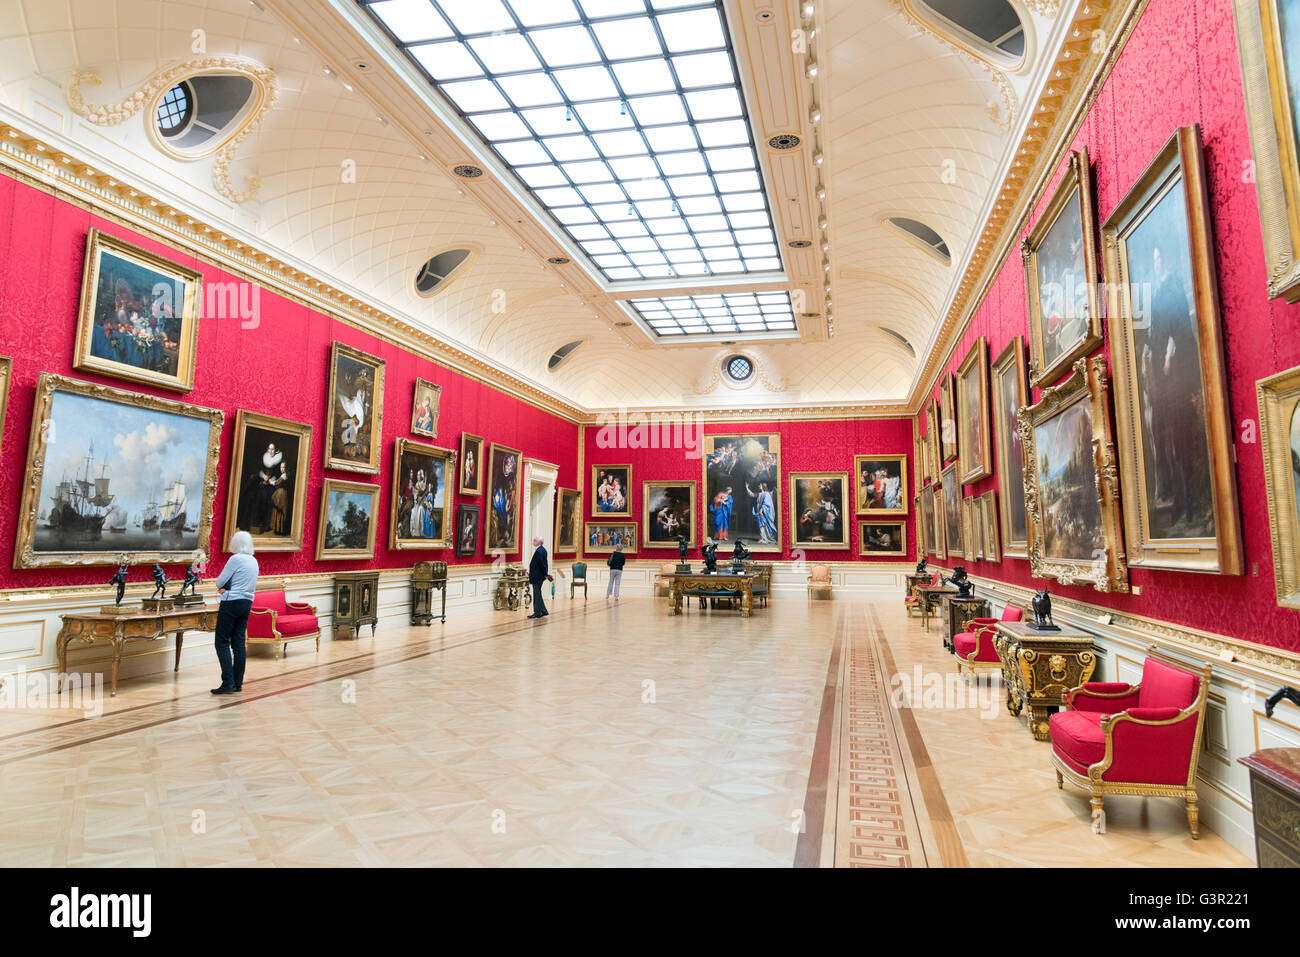 The Great Gallery in the Wallace Collection Art gallery, Londres, Reino Unido Foto de stock